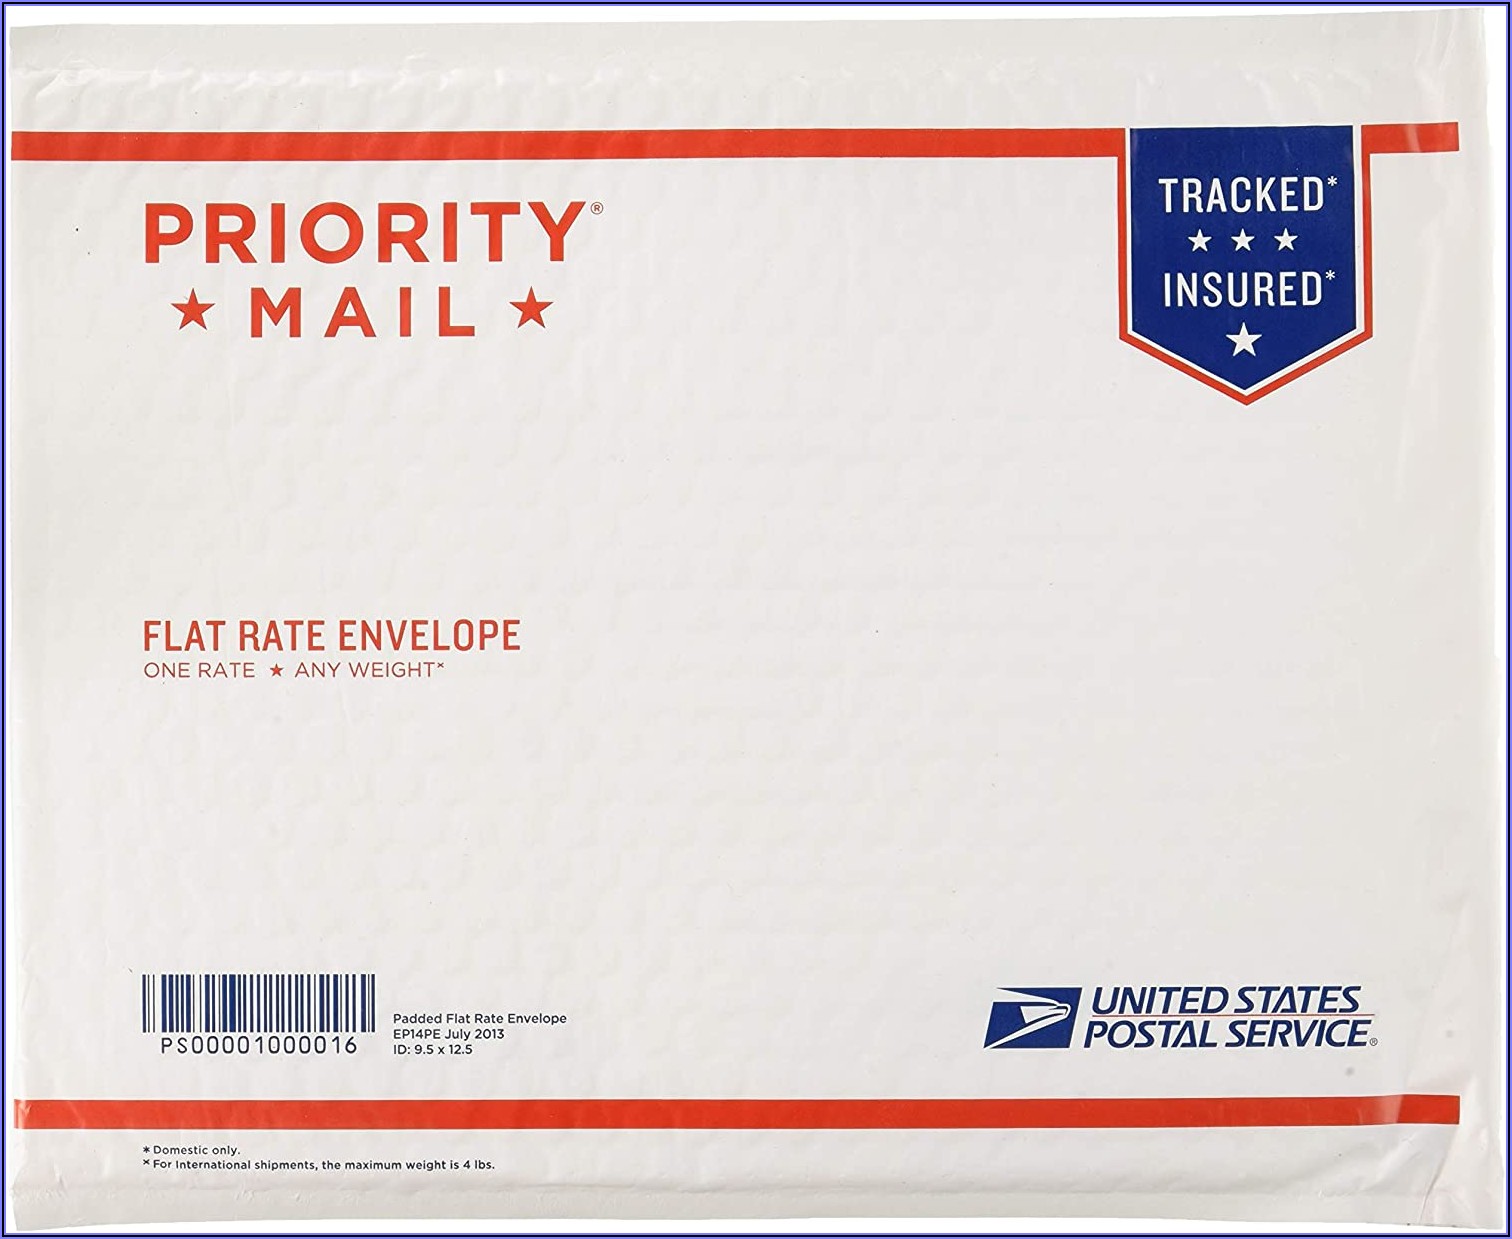 Post Office Priority Mail Envelope Price